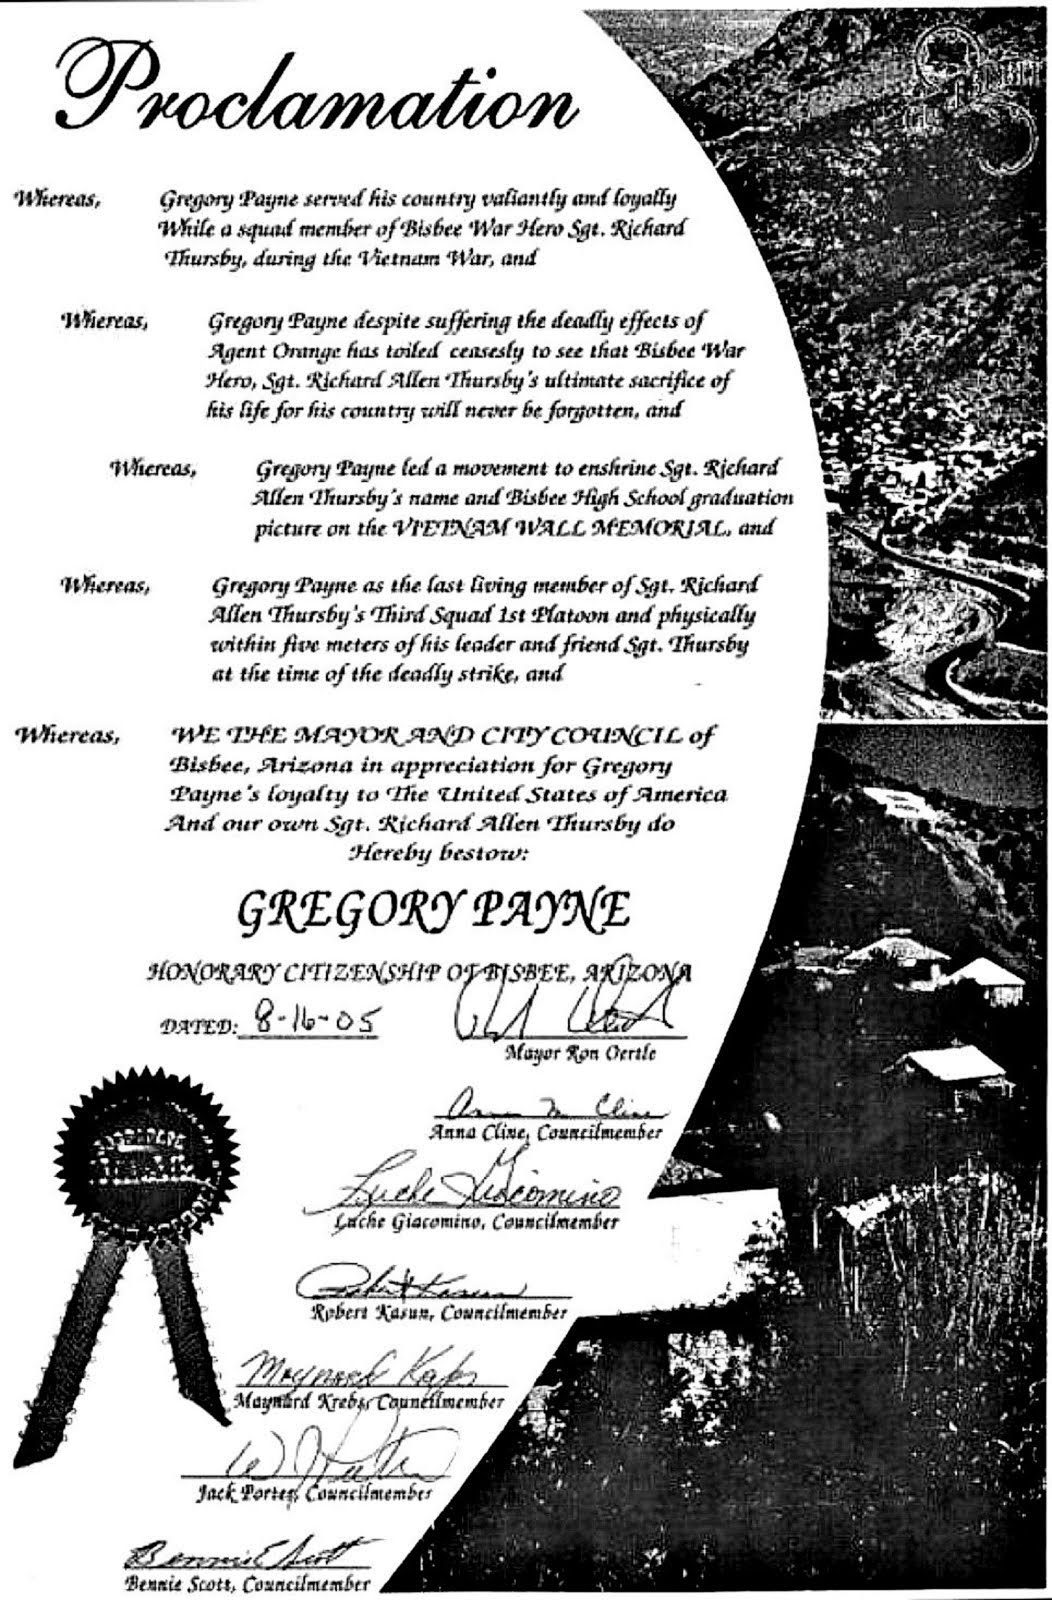 MY BISBEE, AZ  PROCLAMATION - FROM THE BISBEE AZ MEMORIE GROUP AND 7 AZ GOVERNORS.